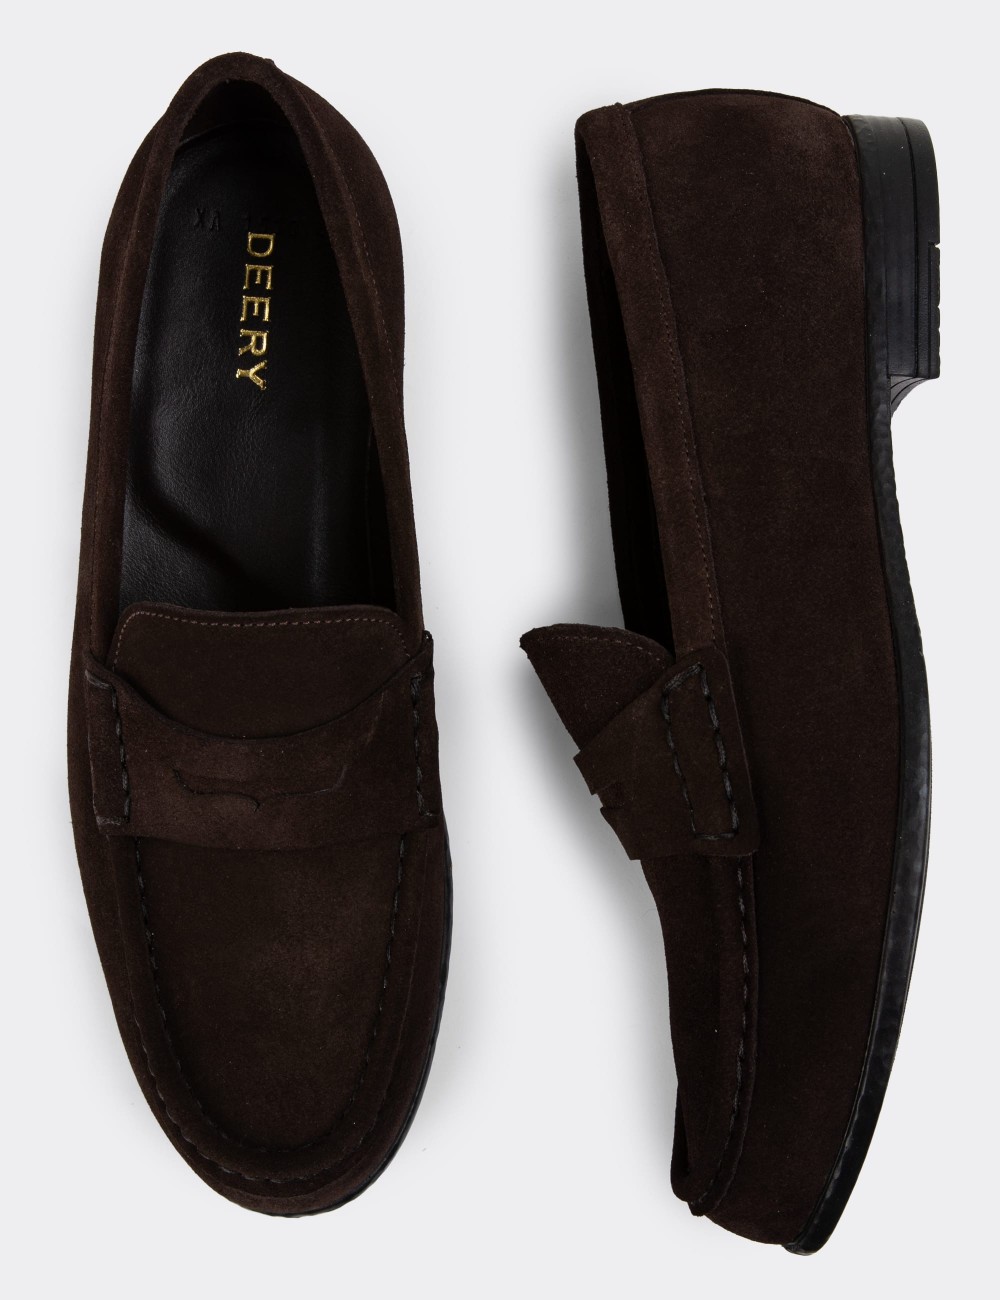 Brown Suede Leather Loafers - 01510MKHVC02